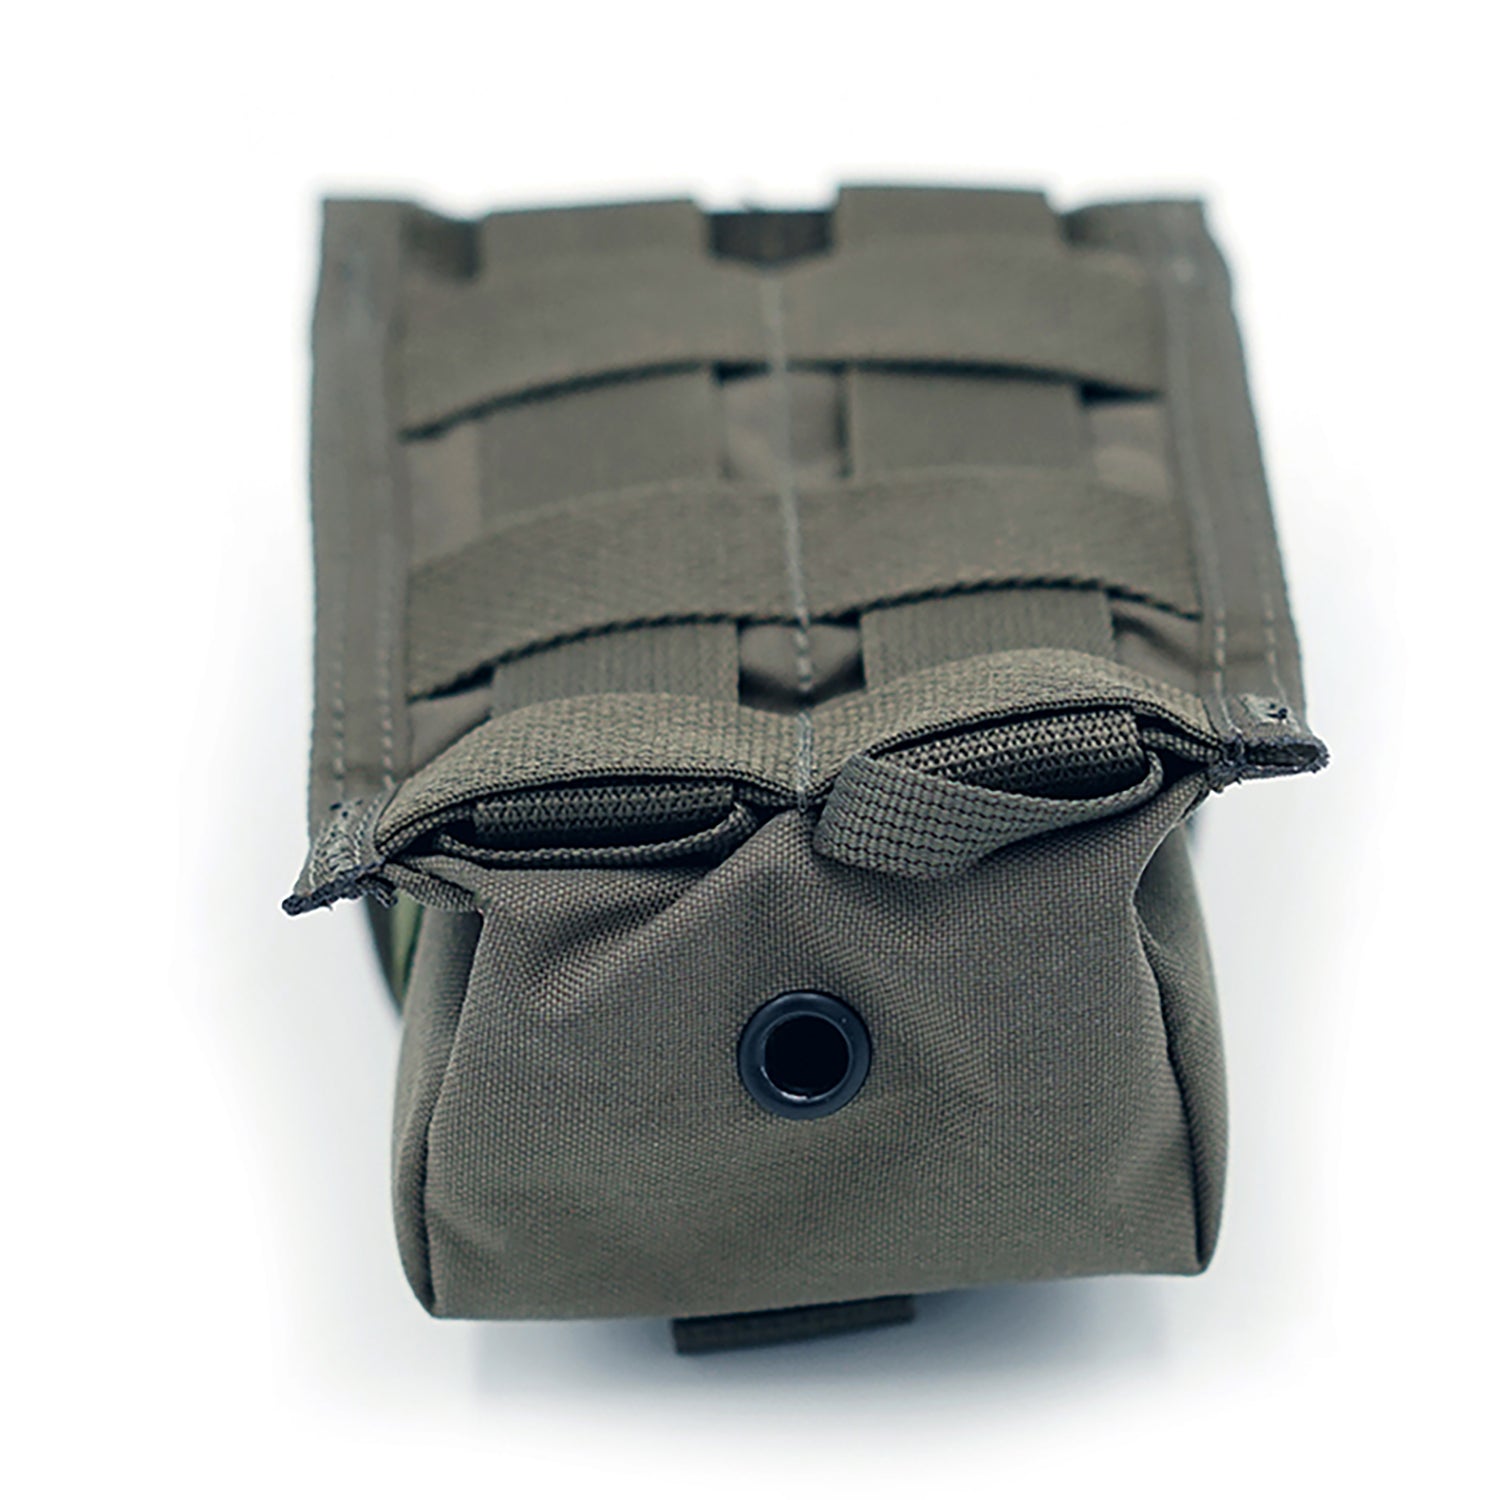 Pre MSA Paraclete style Smoke green tiered SR25 mag pouch - Shekkin Gears